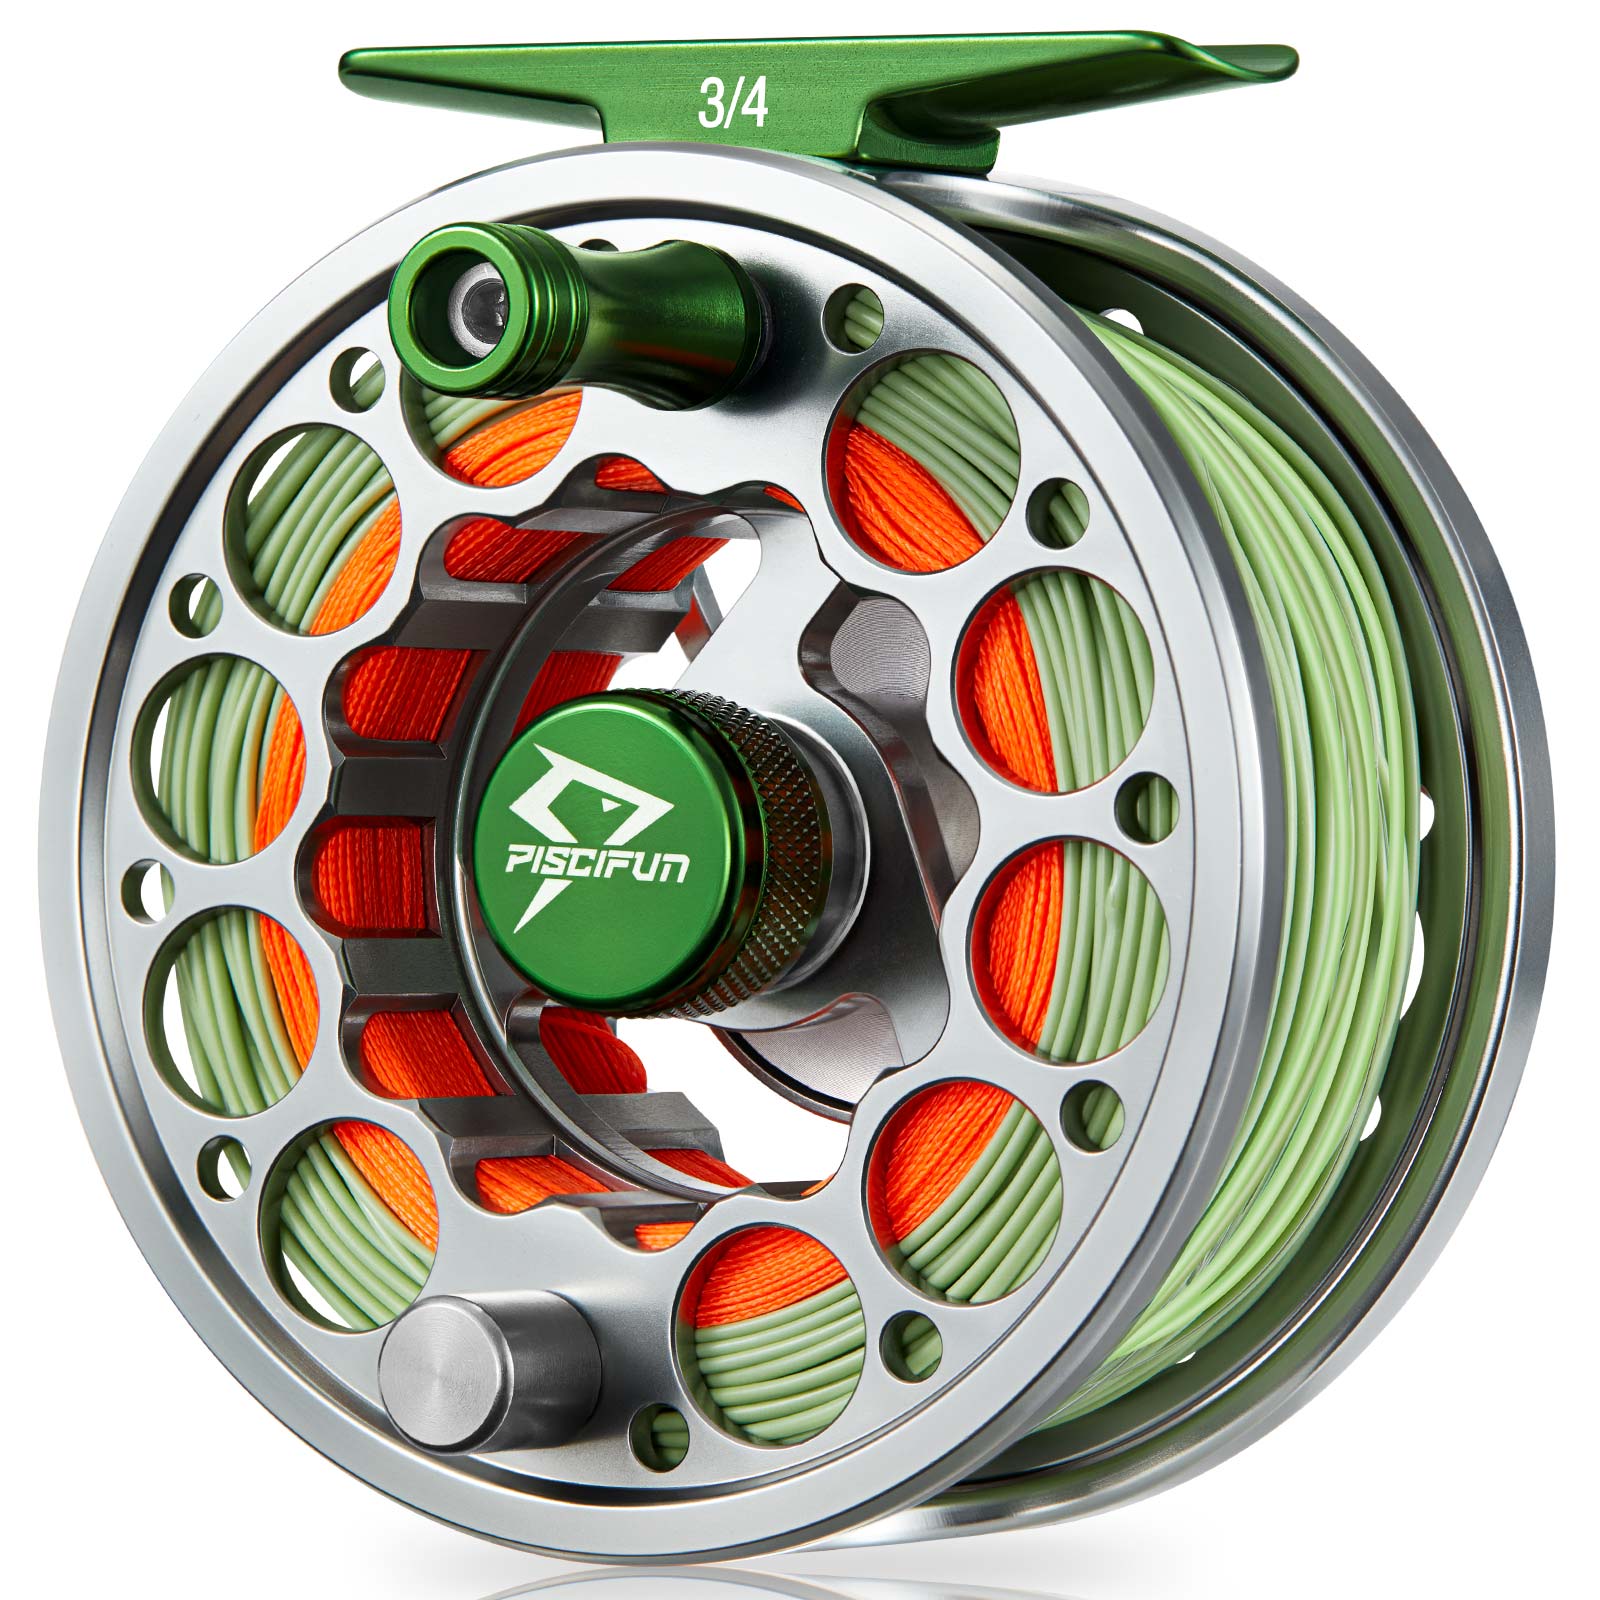 Piscifun Sword Fly Fishing Reel with CNC-machined Aluminum Alloy